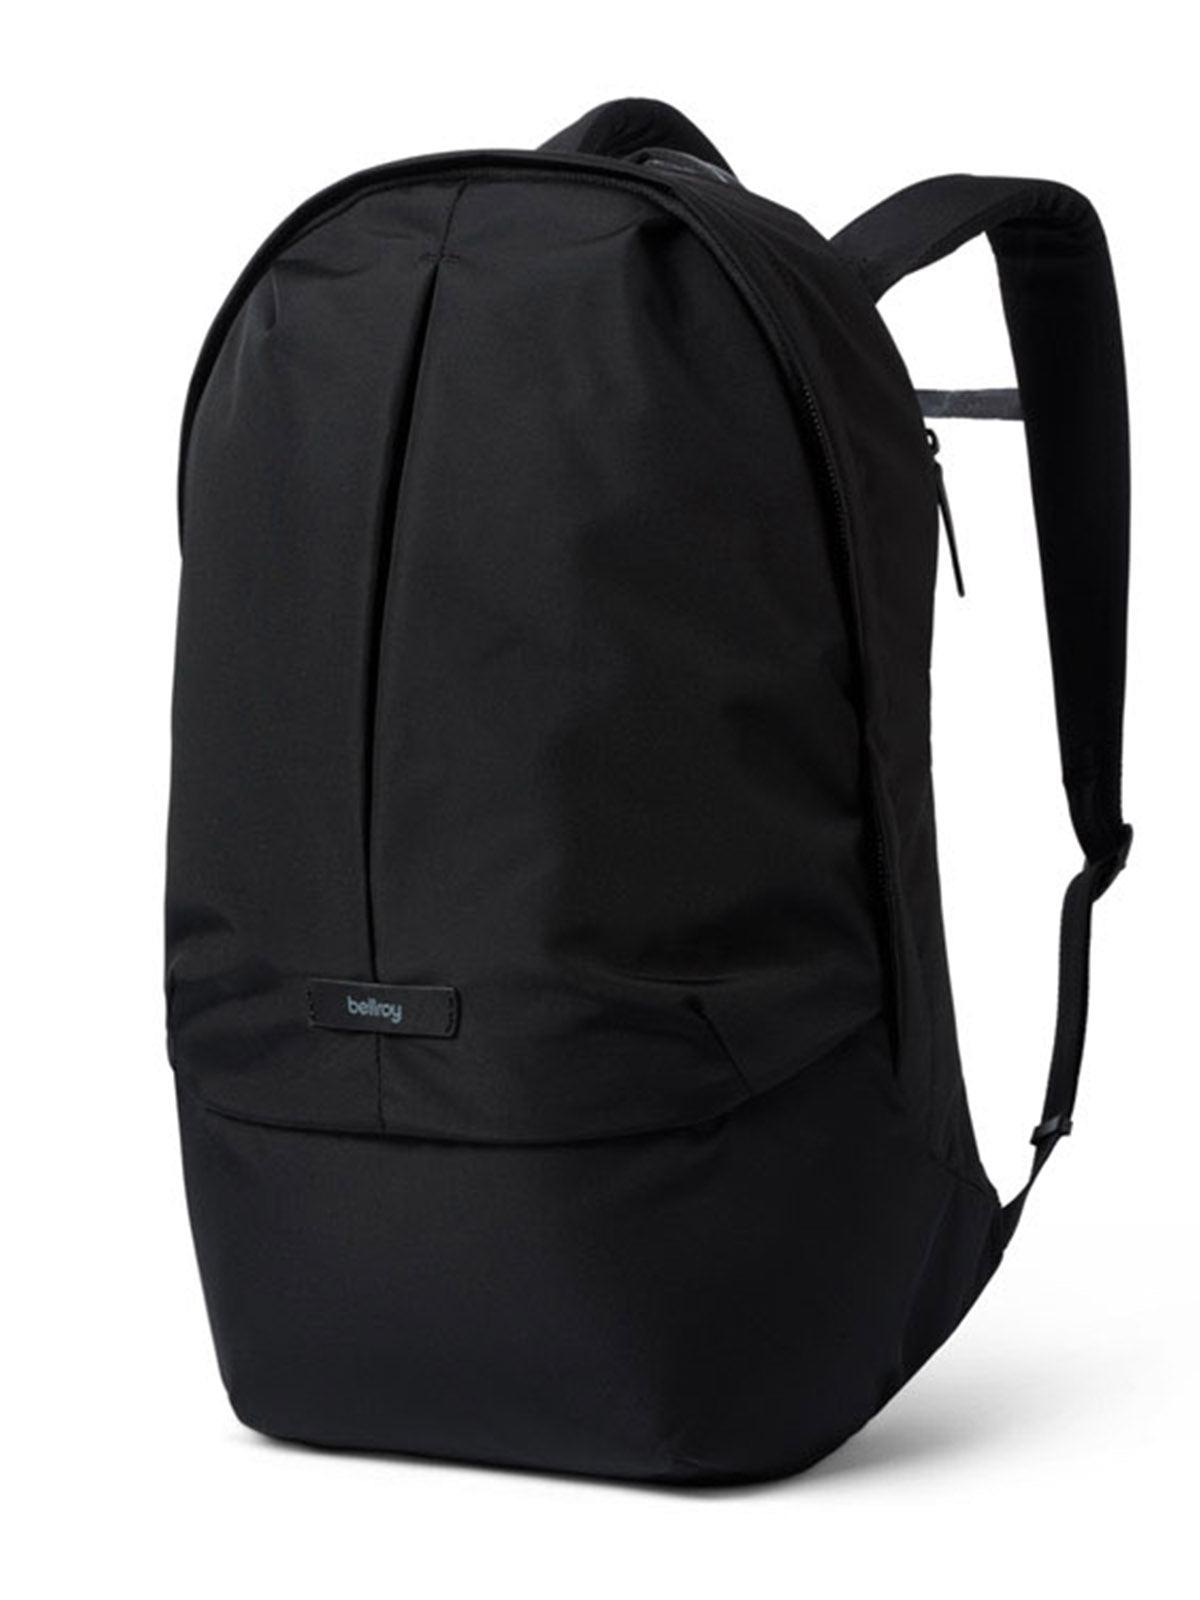 Bellroy Classic Backpack Plus Second Edition Black